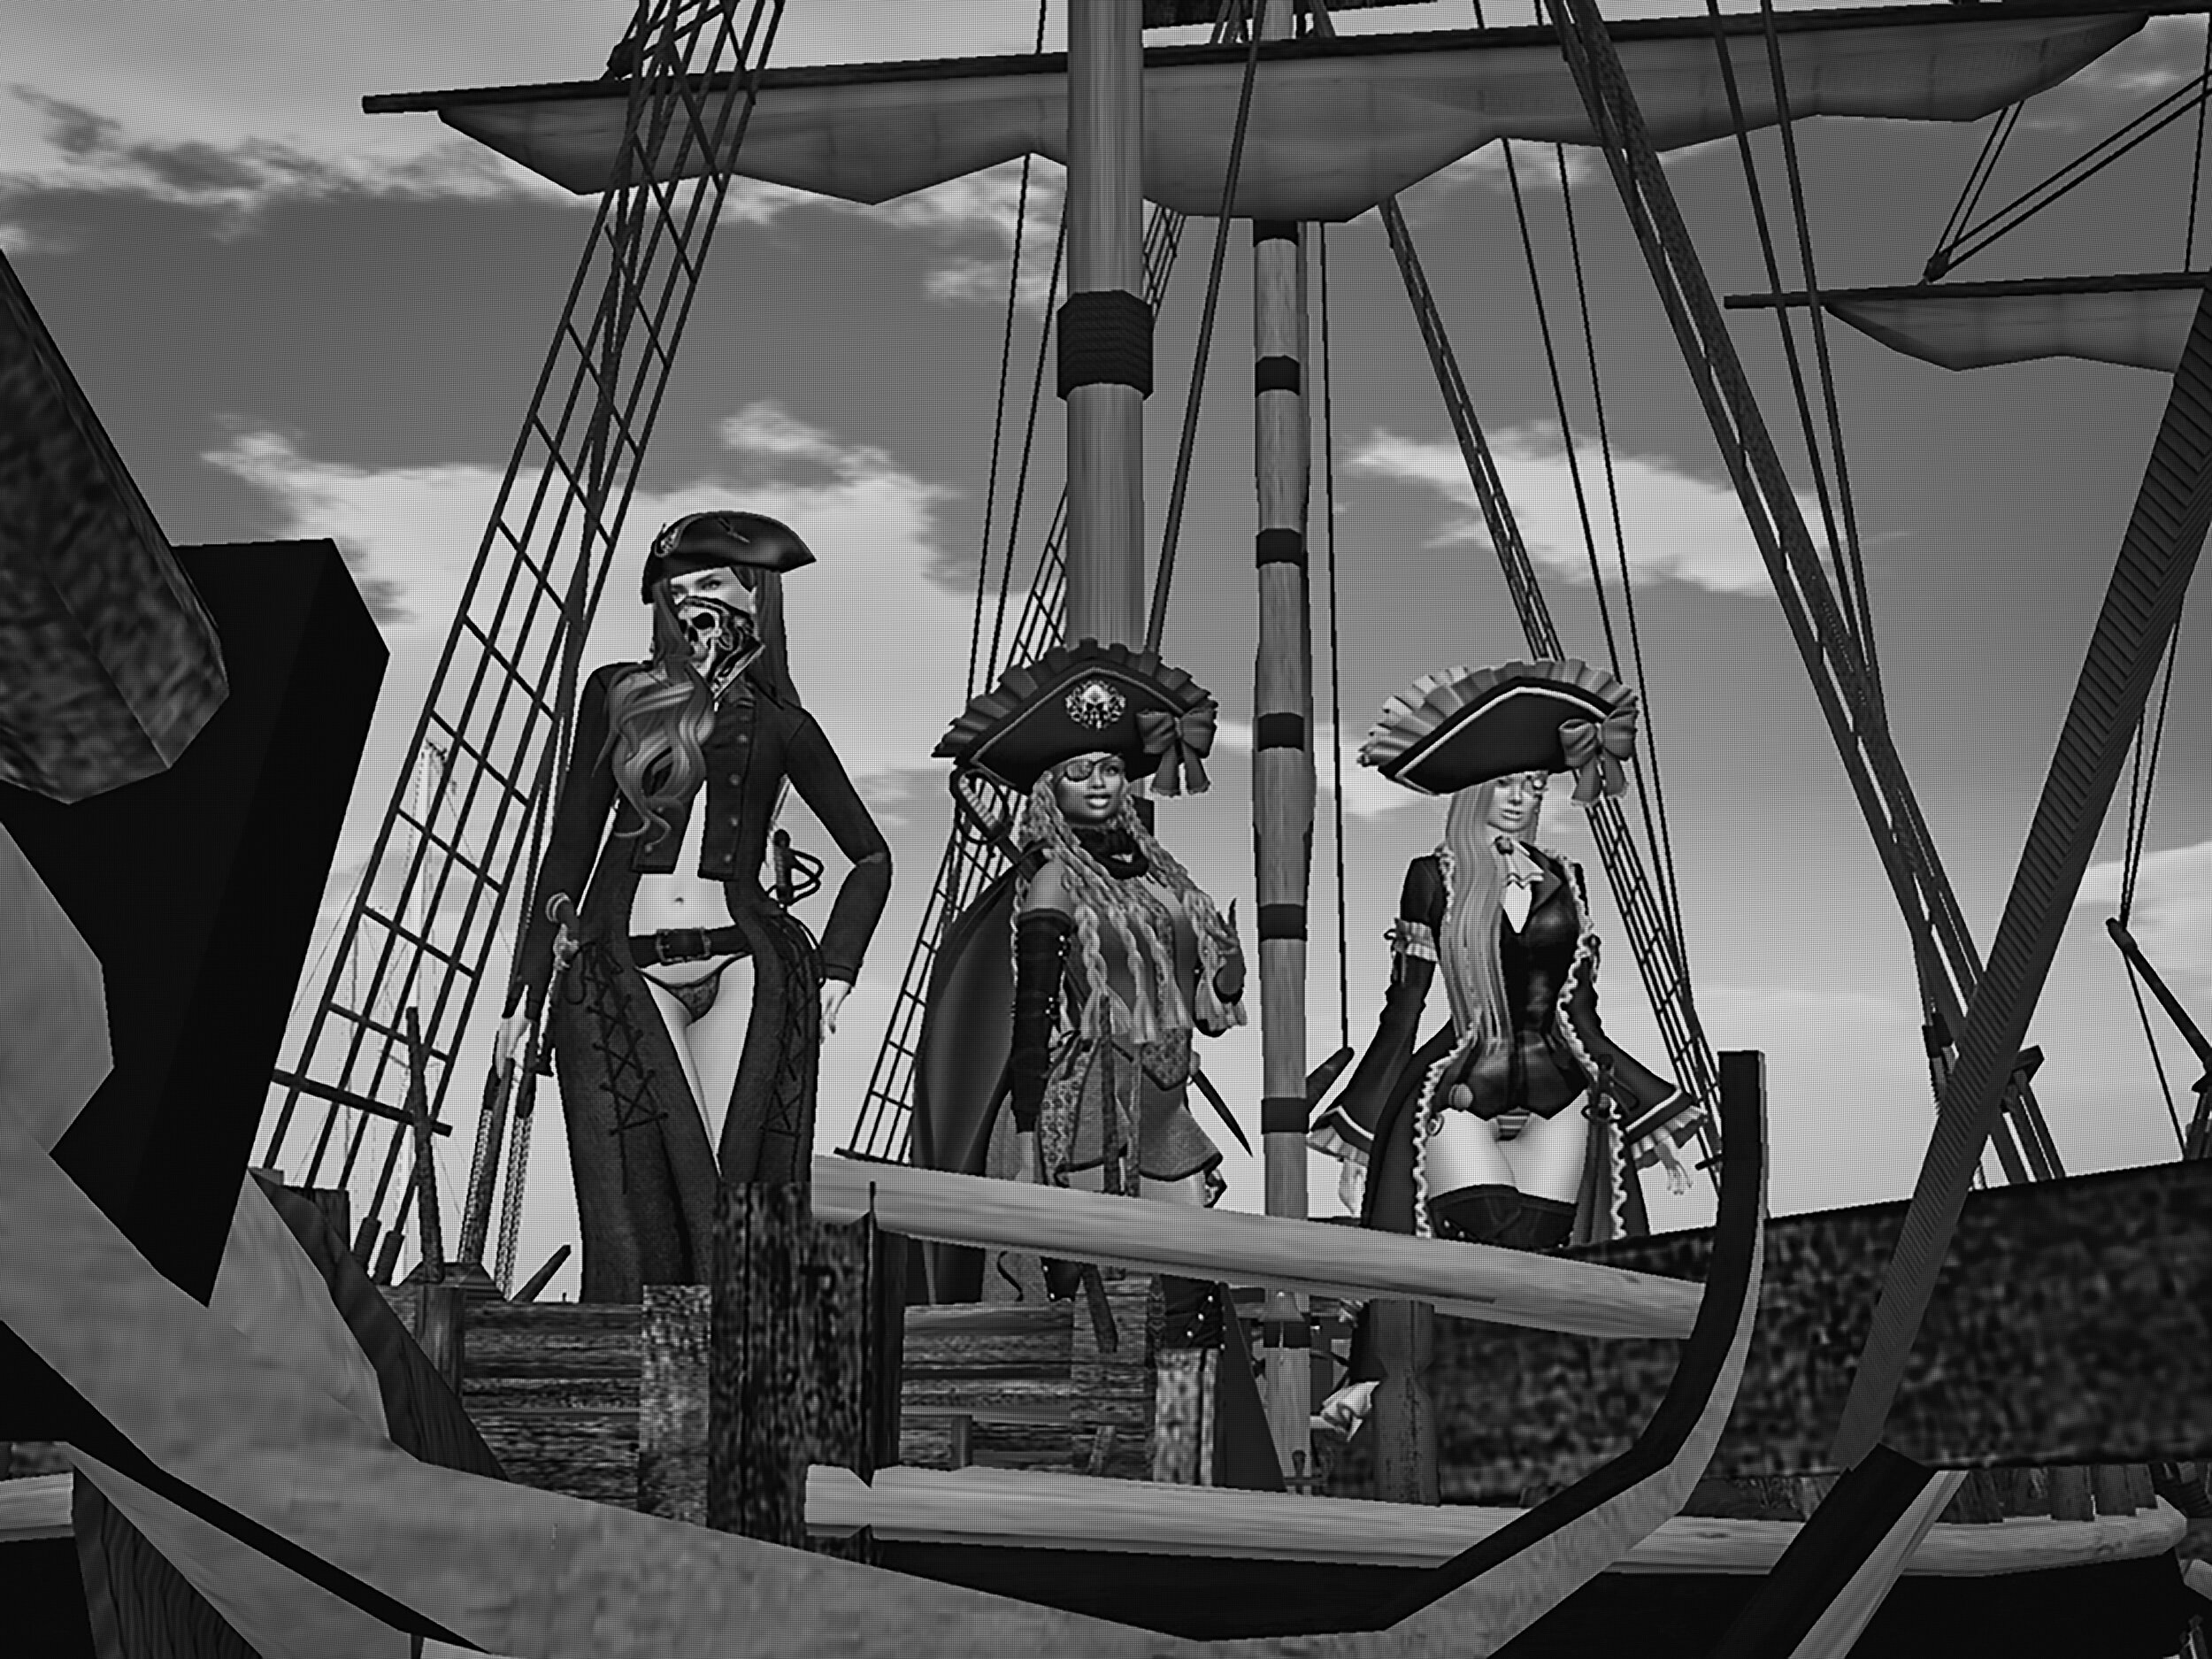  A trio of pirate sailors.    part of Second Lives book   